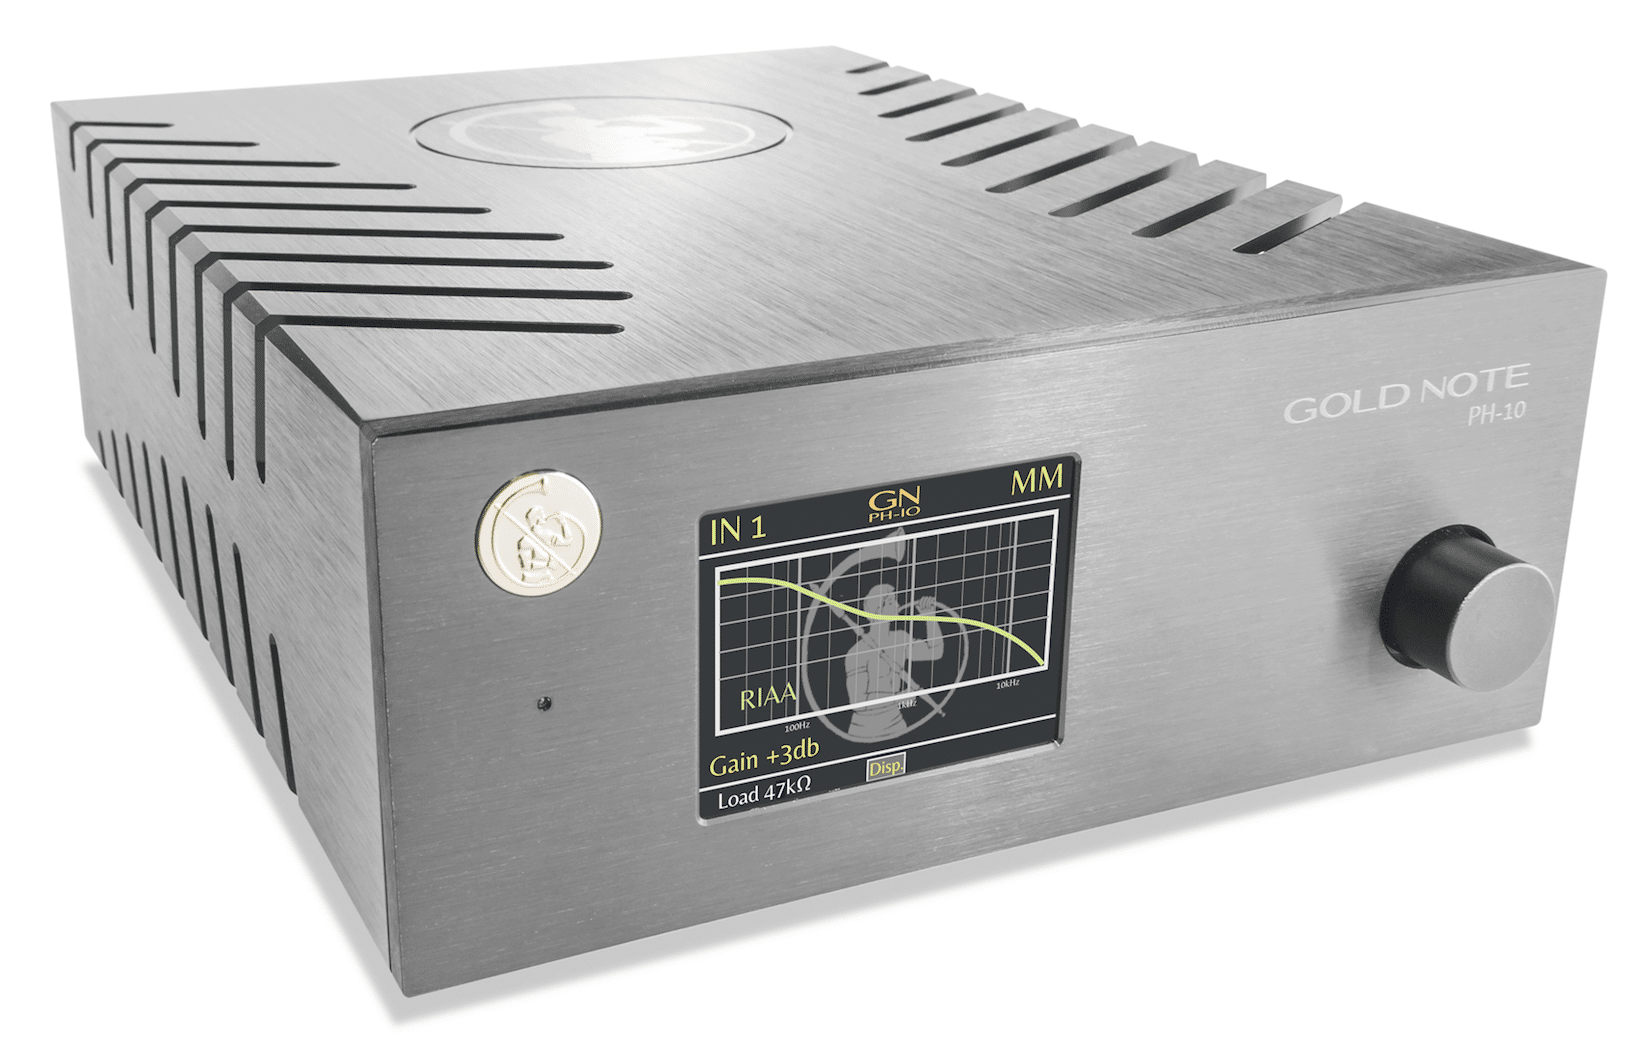 PH-10 Phono Amplifier from Gold Note